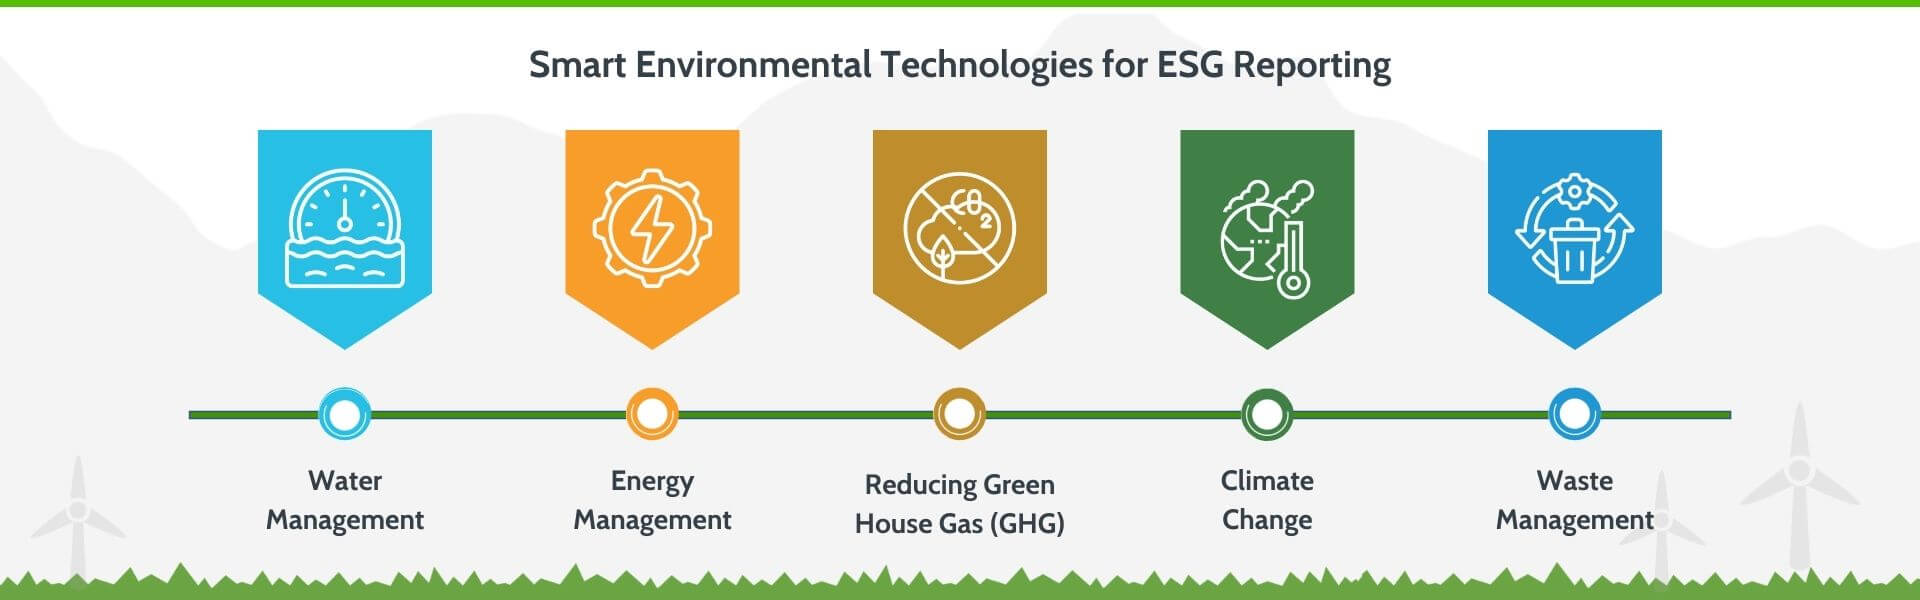 Greenvironment provides IoT & AI based smart environmental management solutions for buildings & businesses